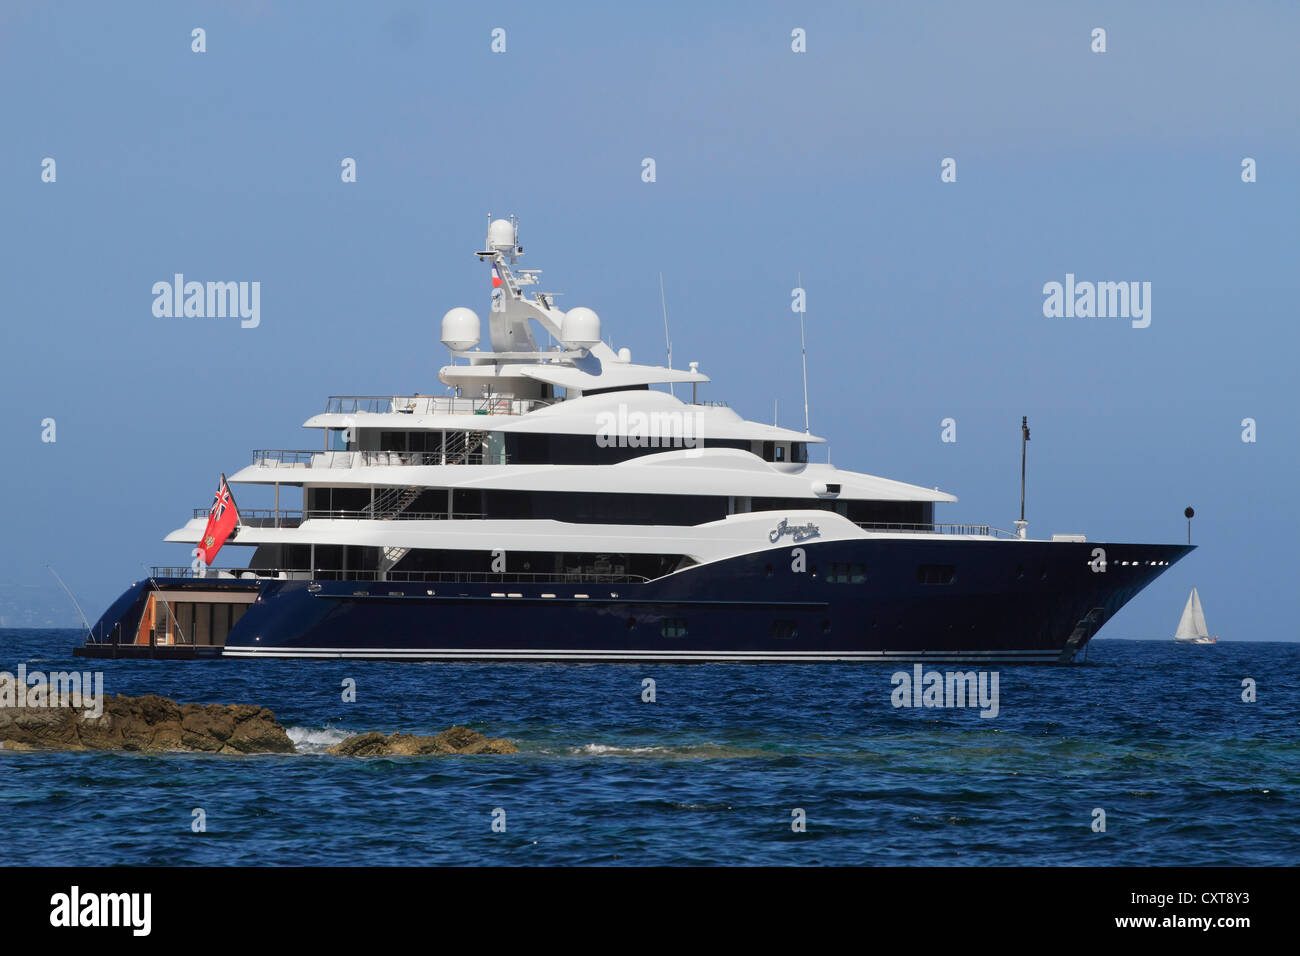 Amaryllis, a cruiser built by Abeking and Rasmussen, length: 78.43 meters, built in 2011, French Riviera, France, Europe Stock Photo